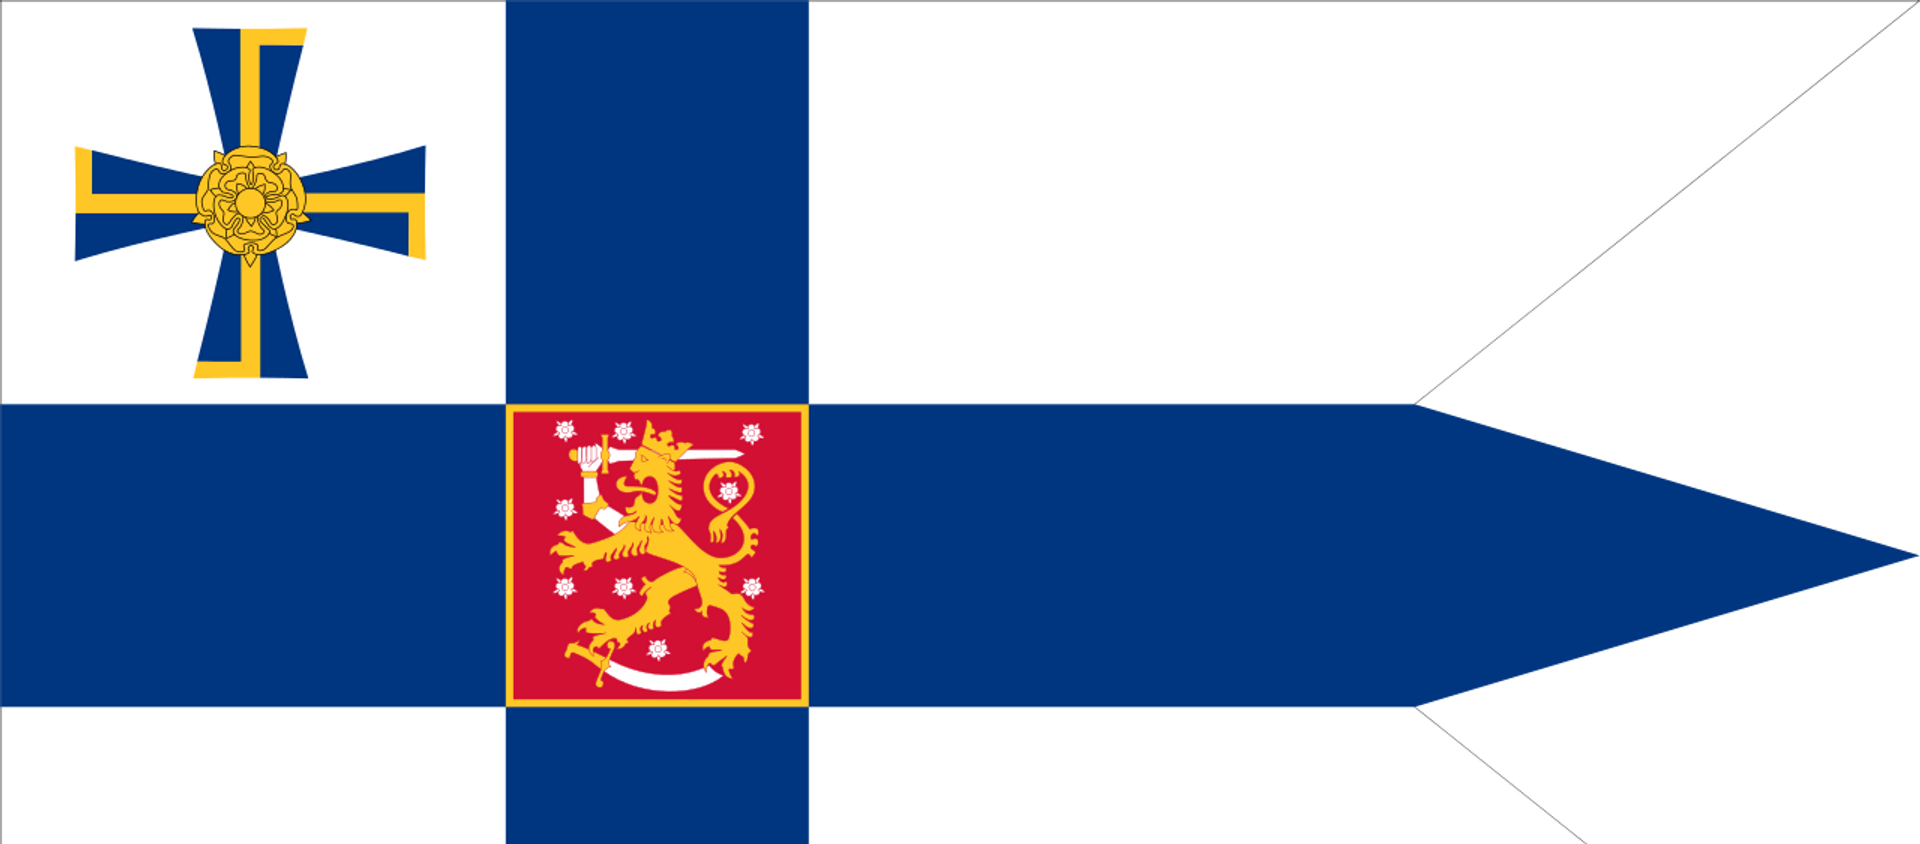 Swallow-tailed state flag for the president of the Republic of Finland - Sputnik International, 1920, 12.10.2017